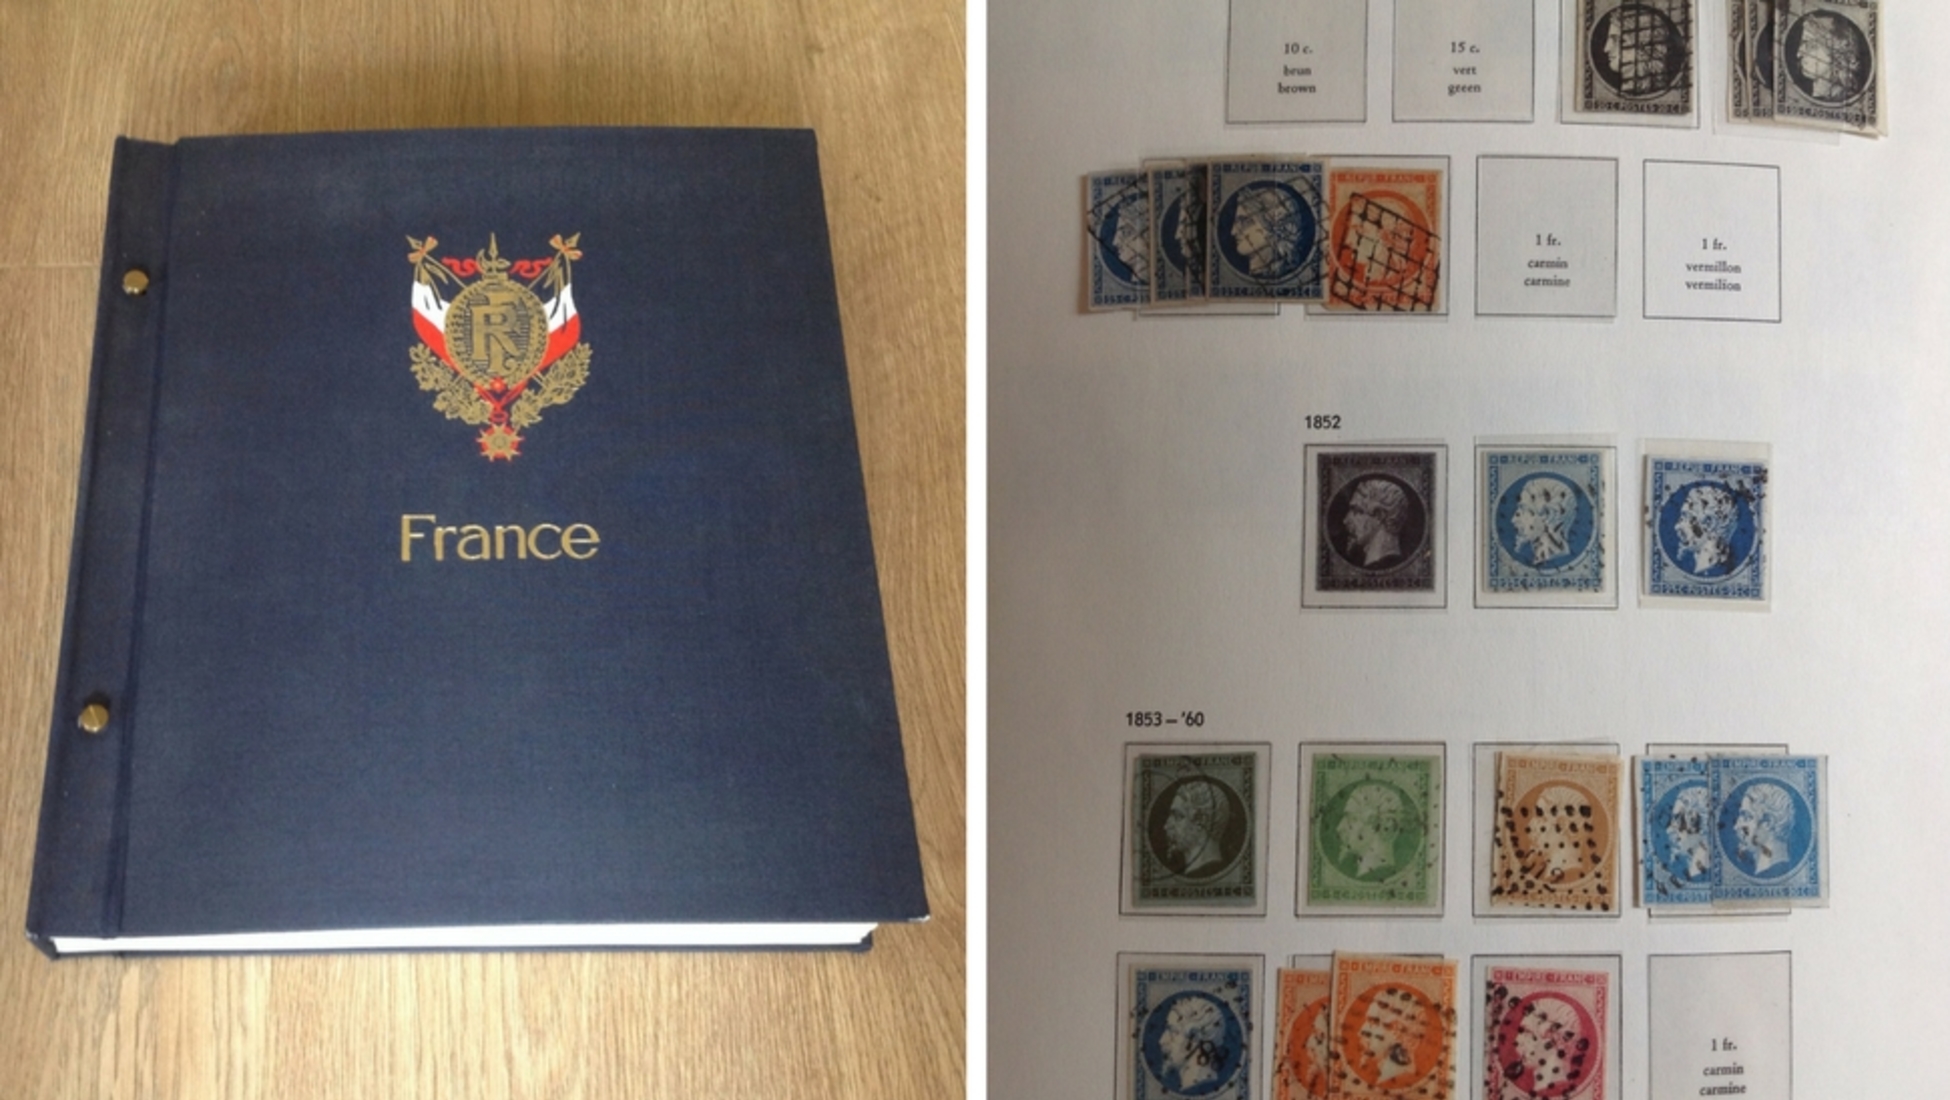 Grandfather's old stamp book - value? : r/stamps